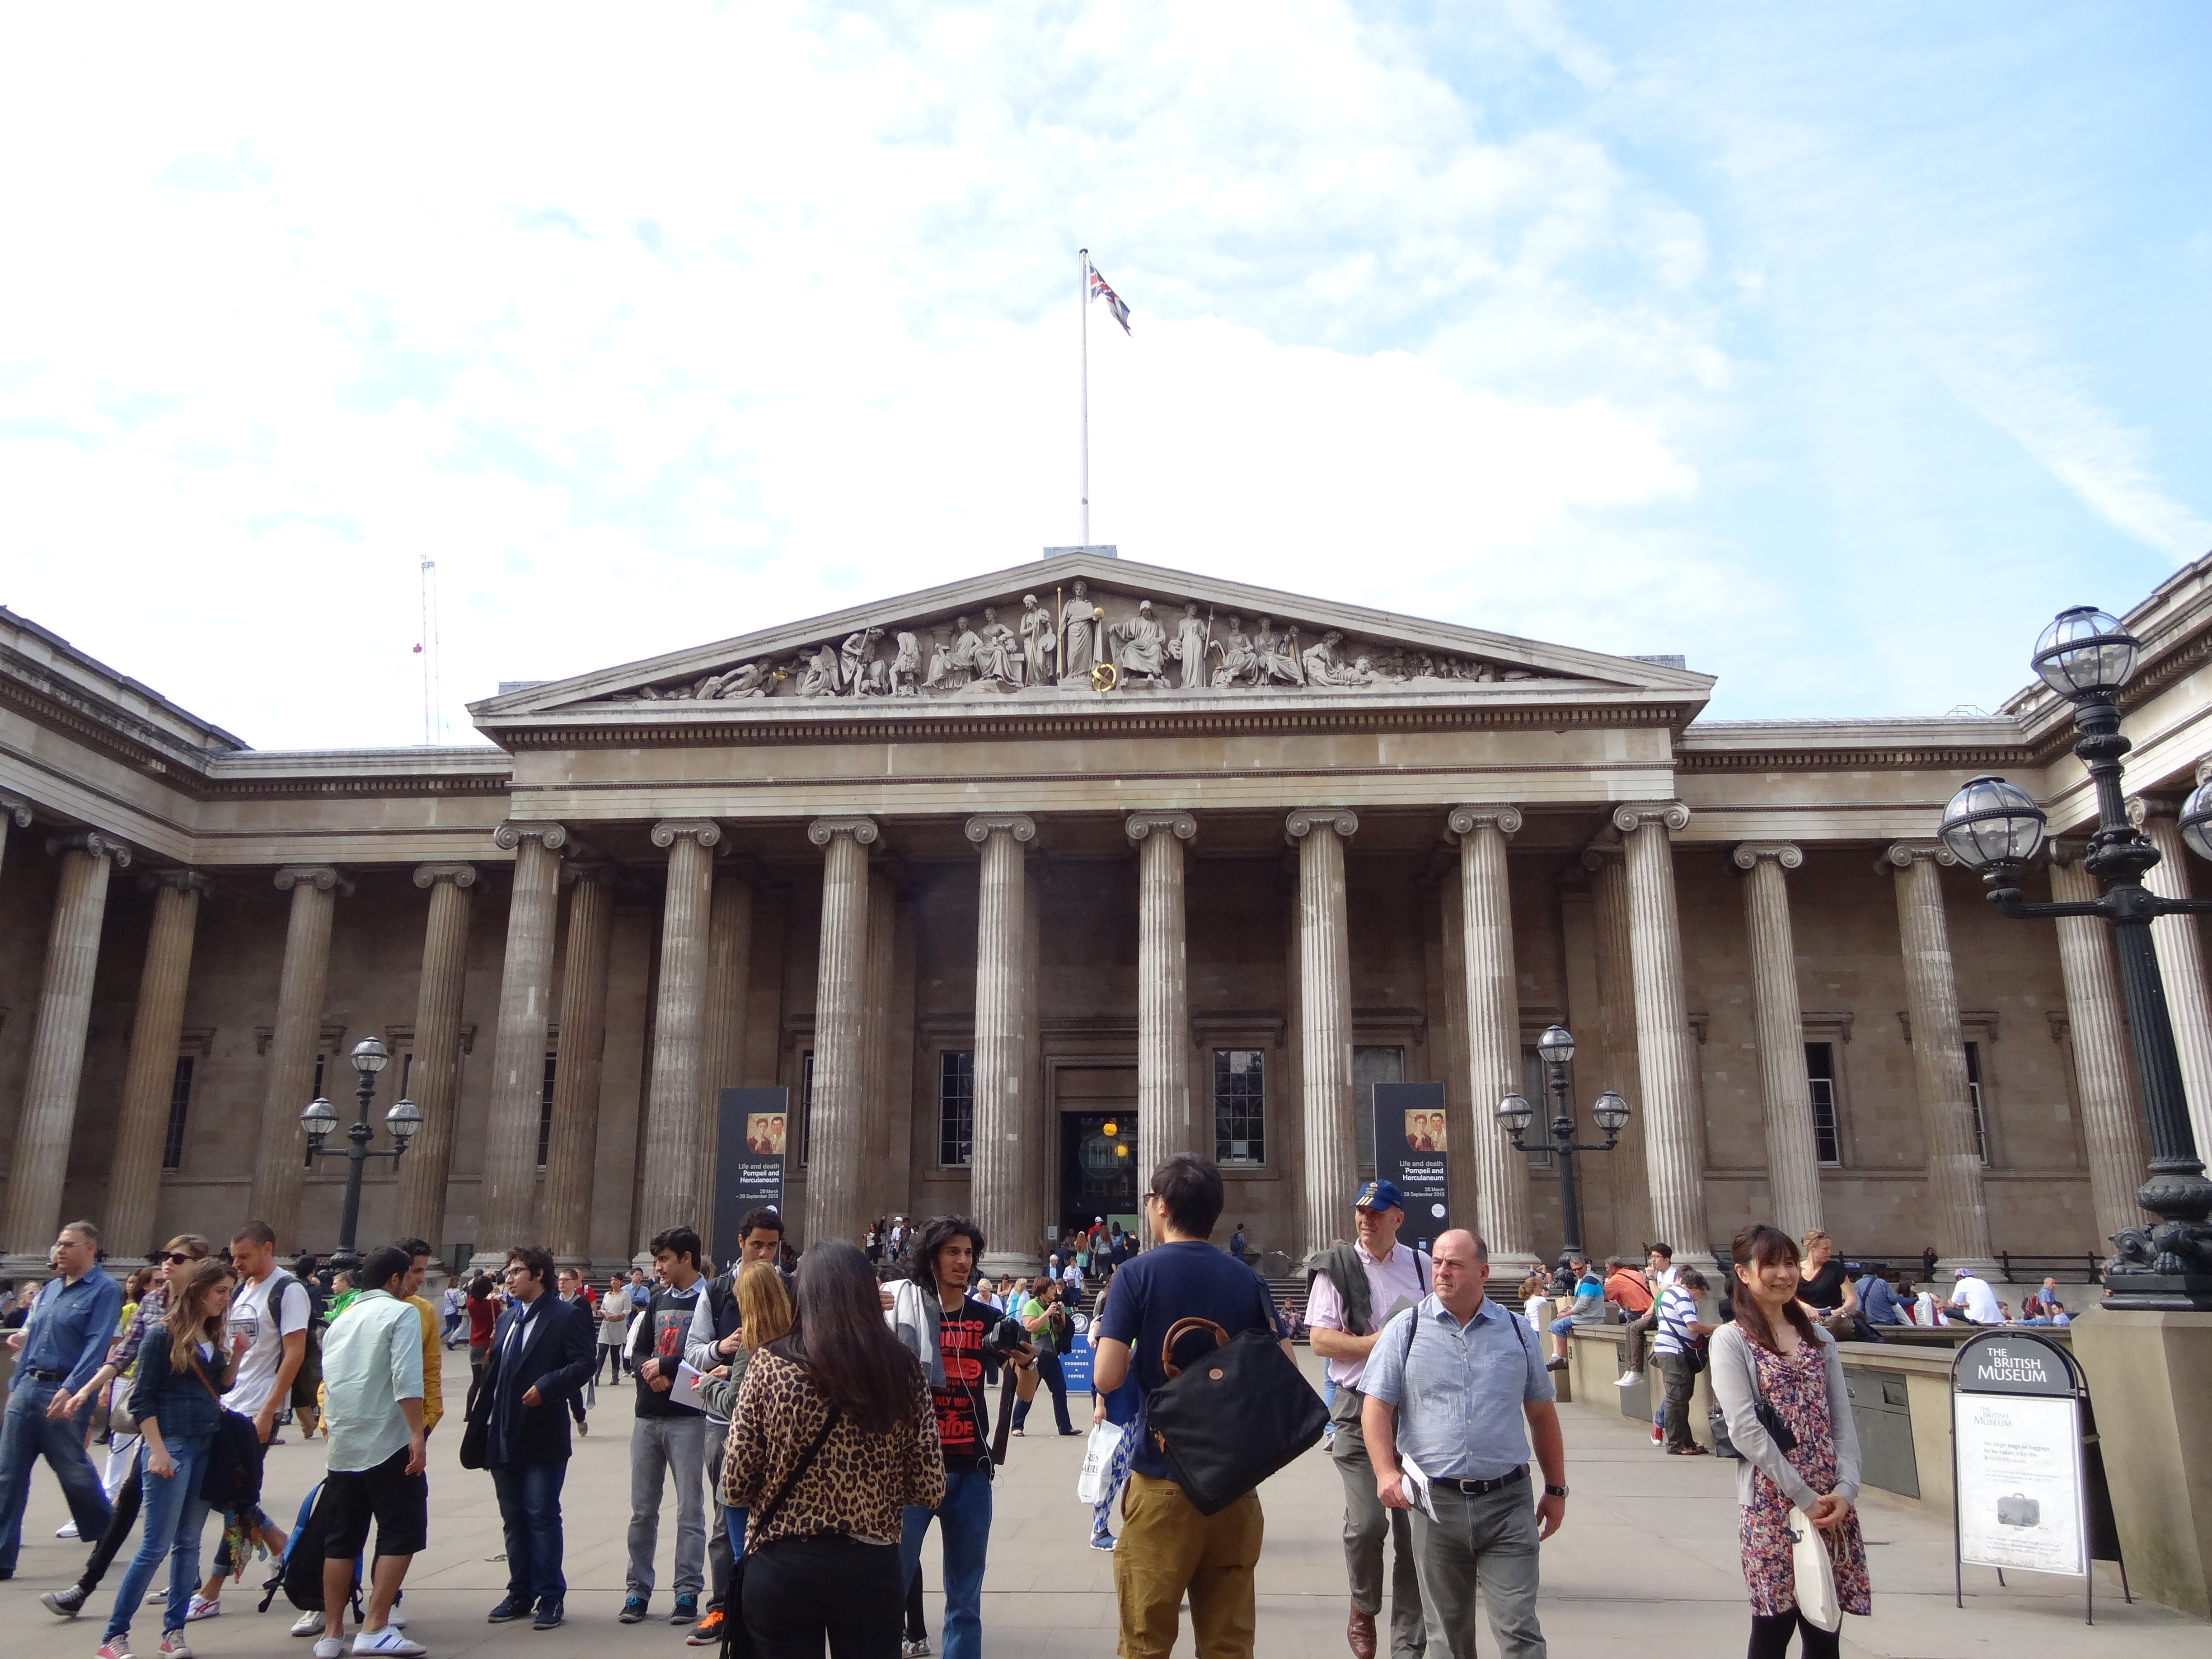 OUTSIDE THE BRITISH MUSEUM